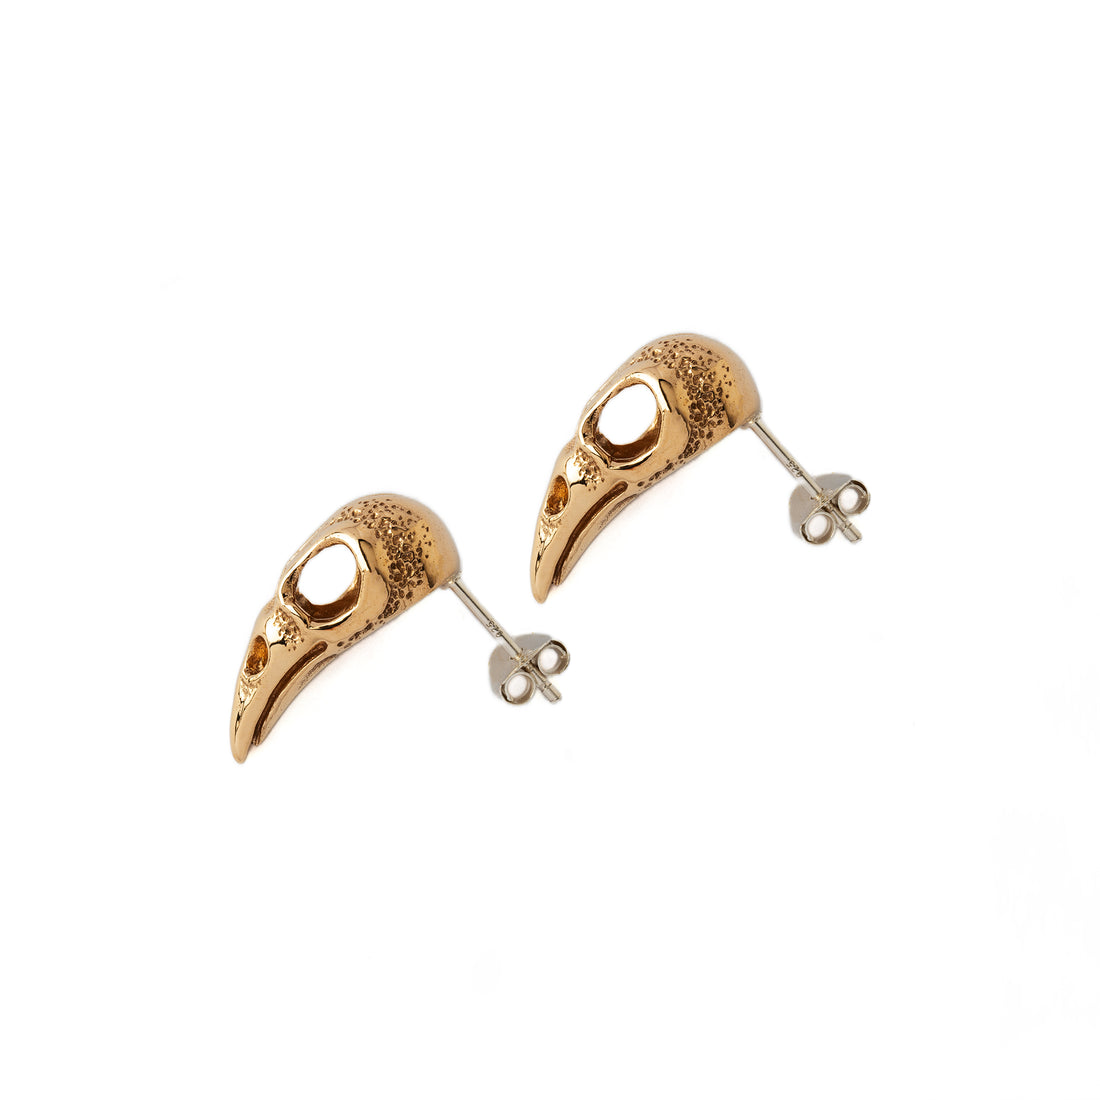 Raven Skull Studs right side view